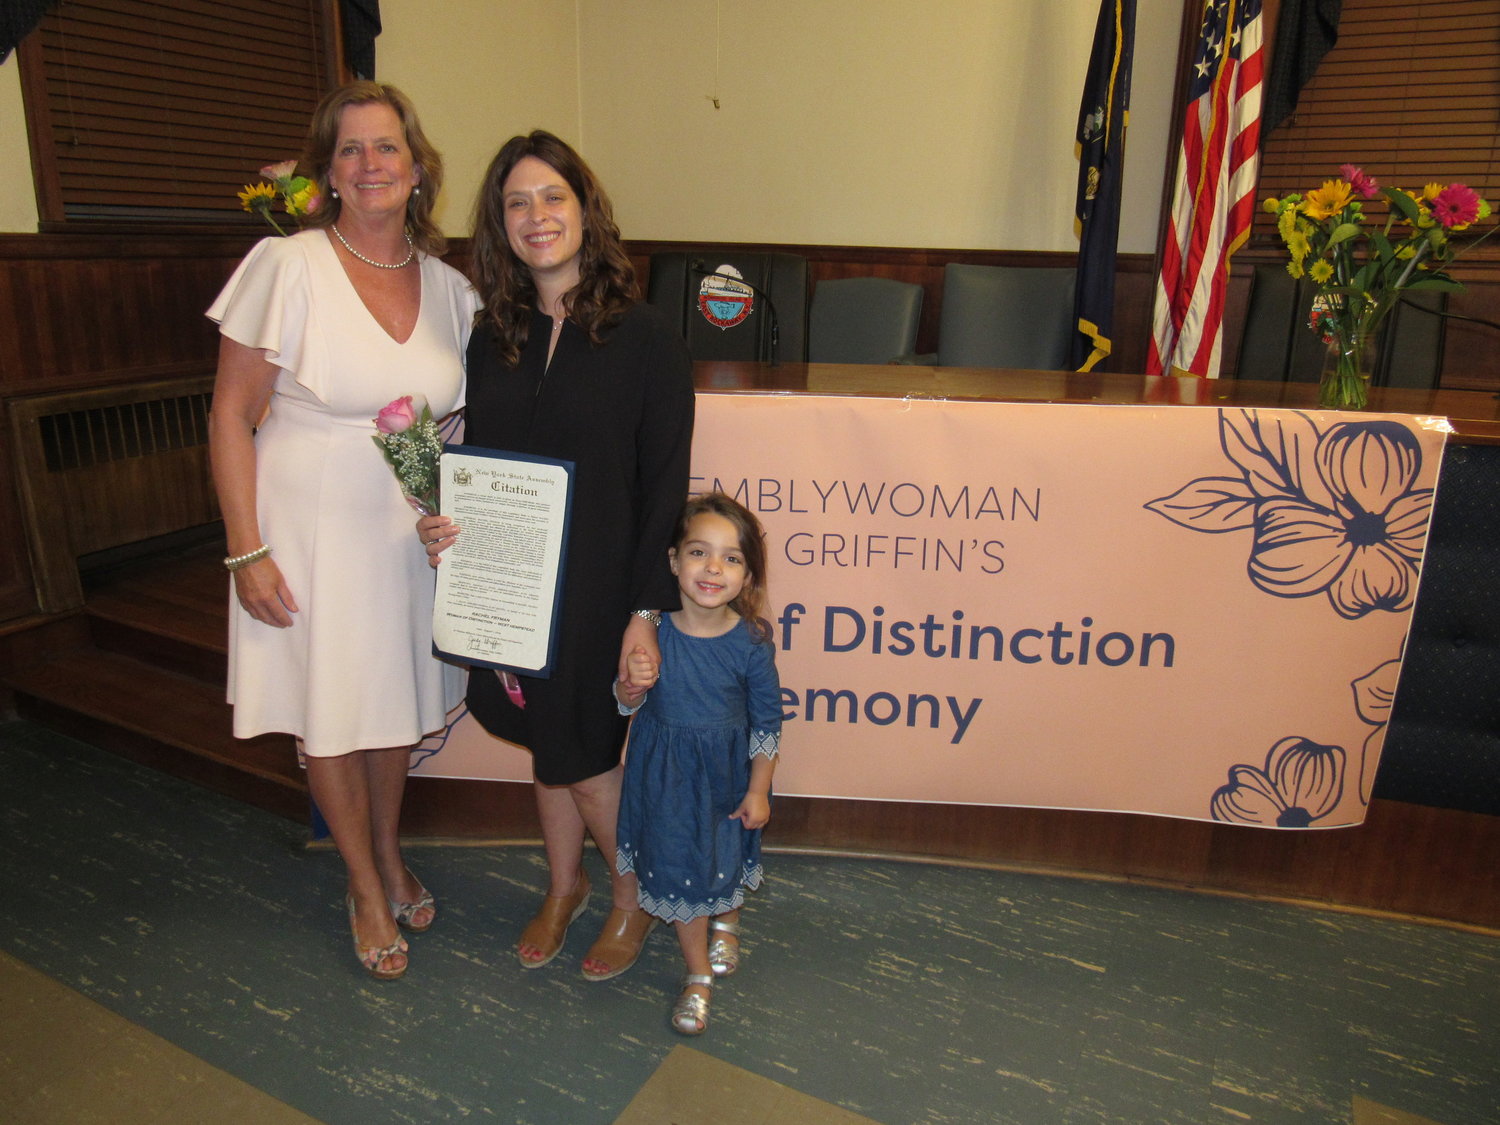 West Hempstead resident Rachel Fryman, who was joined by her daughter, Aliza, was also honored.